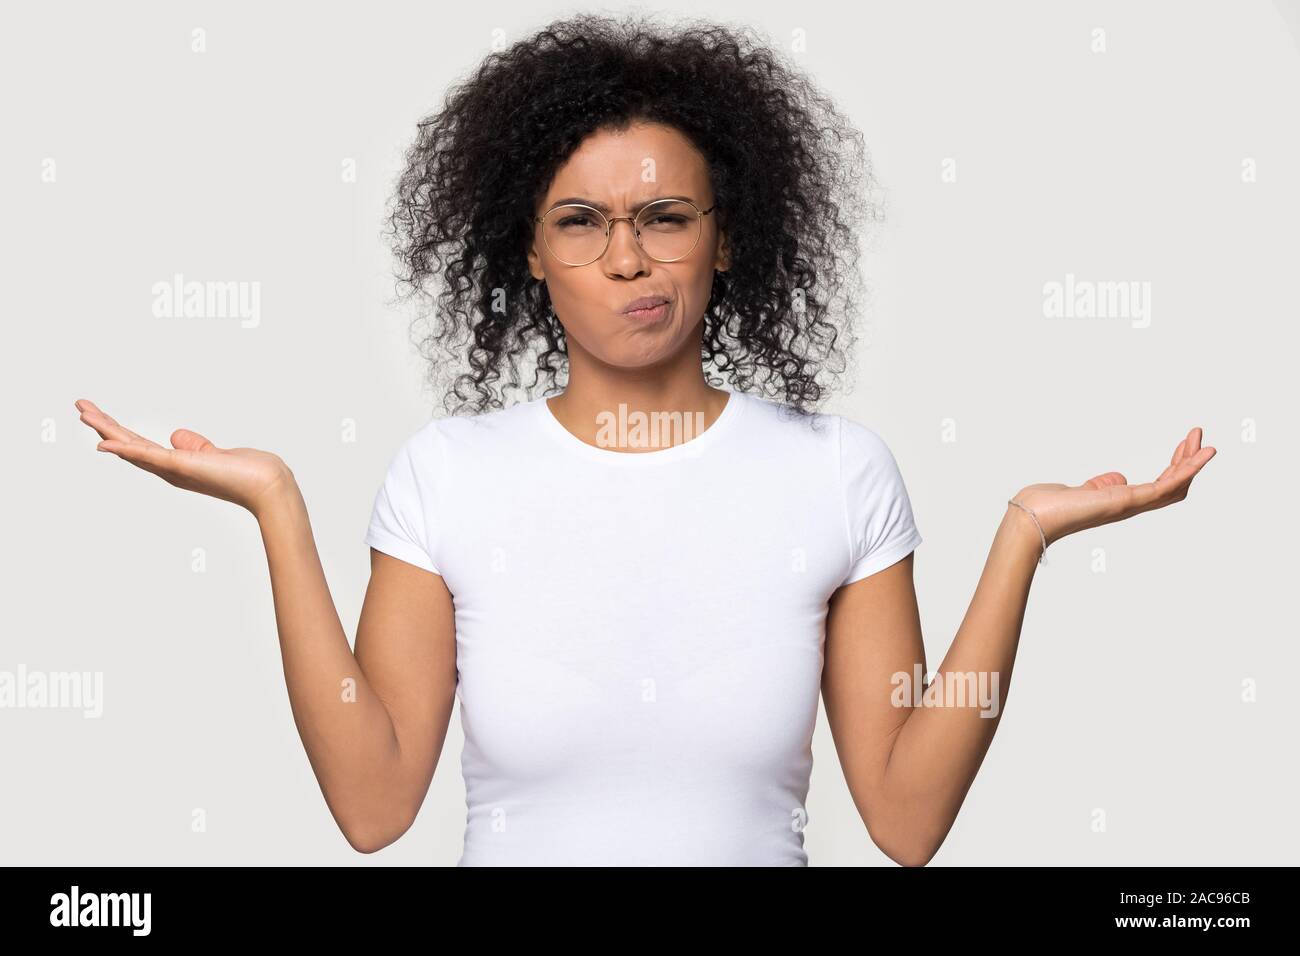 Doubtful African American woman shrugging shoulders, feeling confused Stock Photo